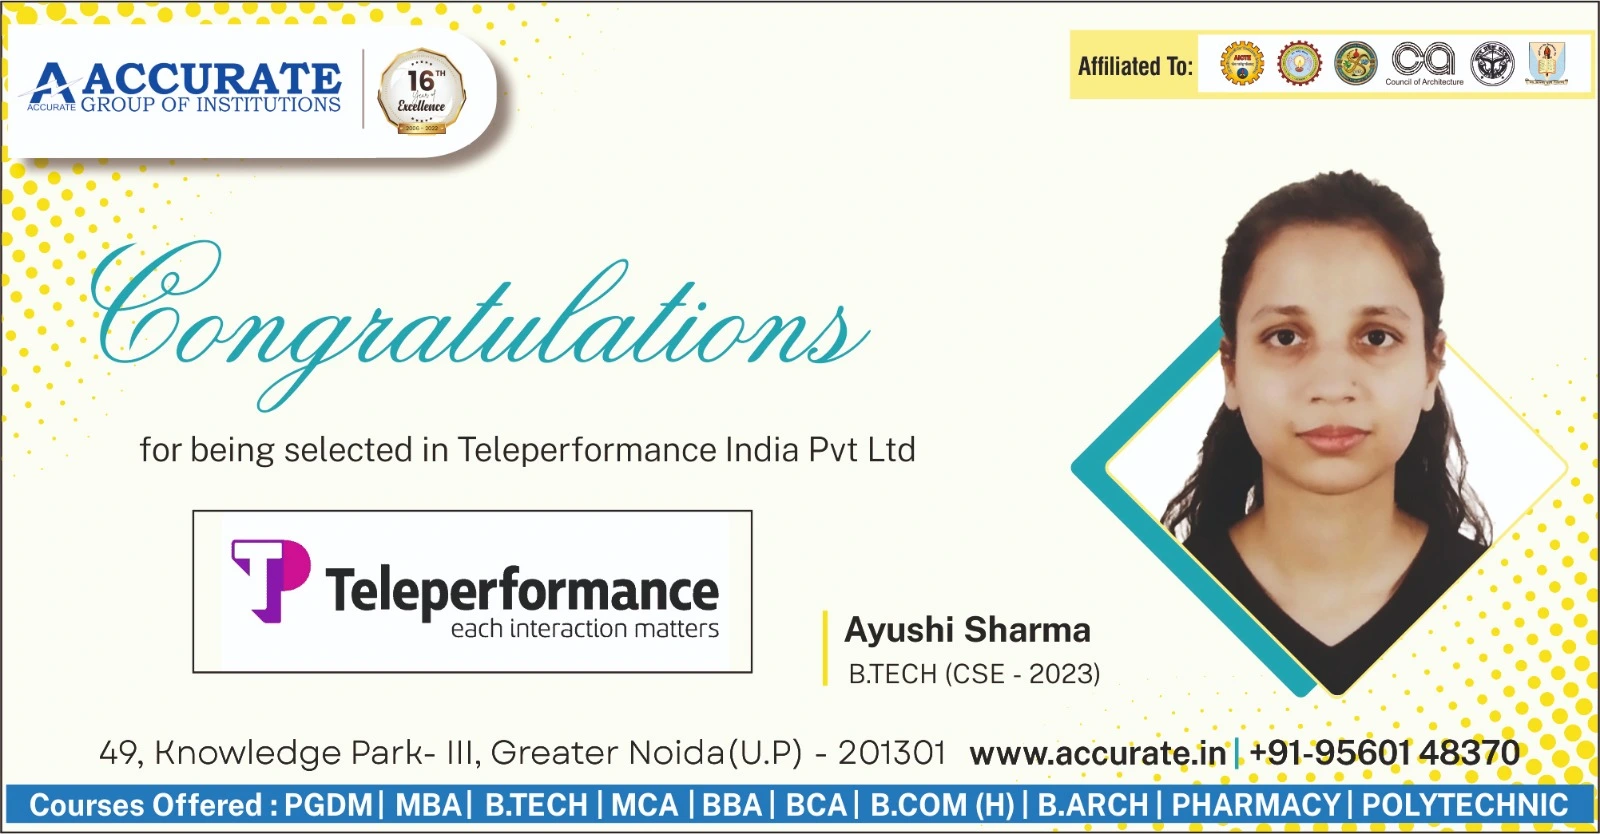 B.Tech Placement - Ayushi Sharma Selected by Teleperformance